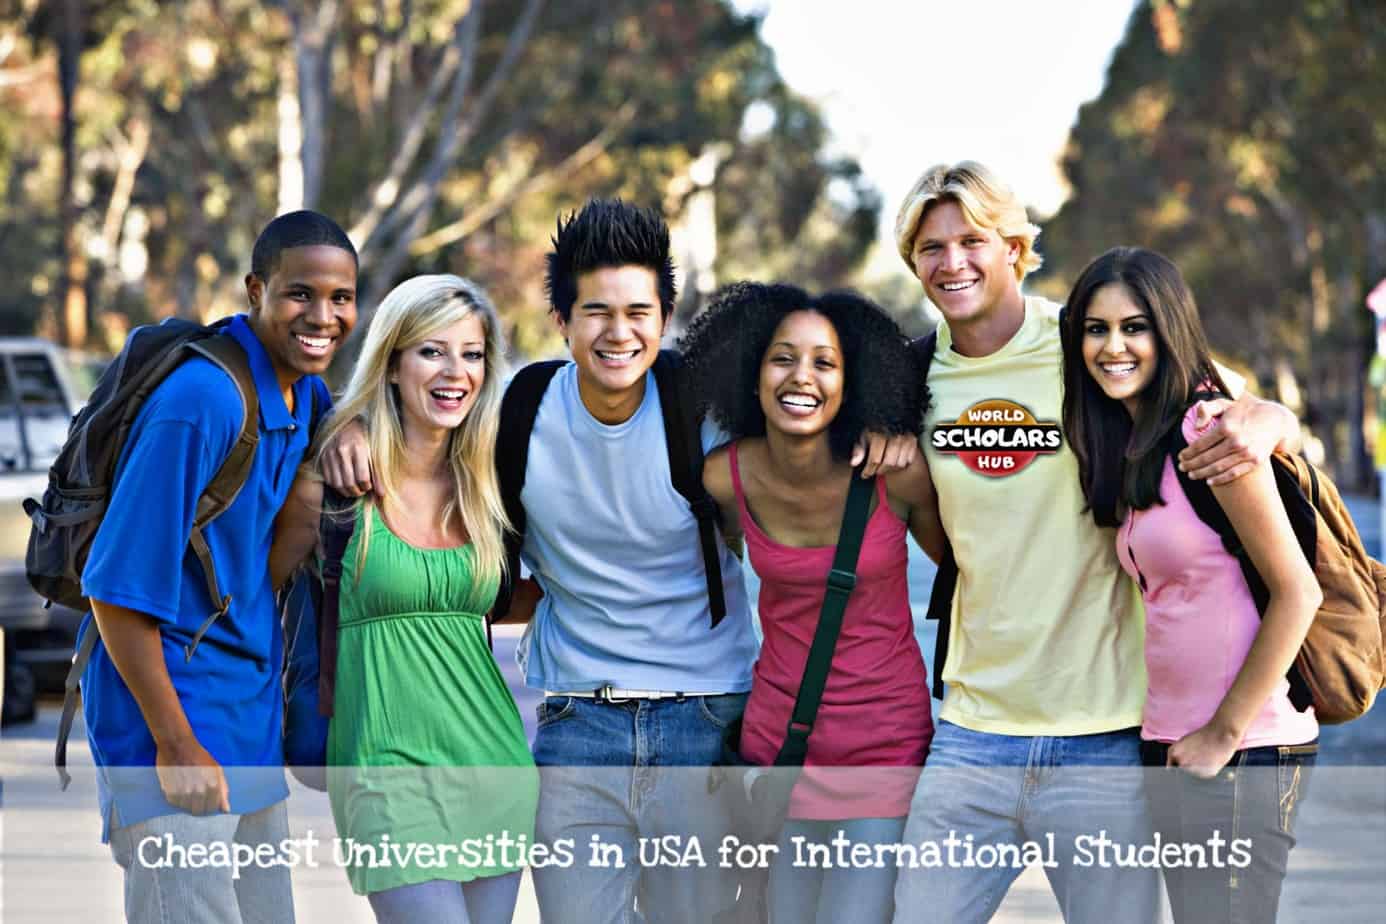 Cheapest Universities in USA for International Students | World Scholars Hub